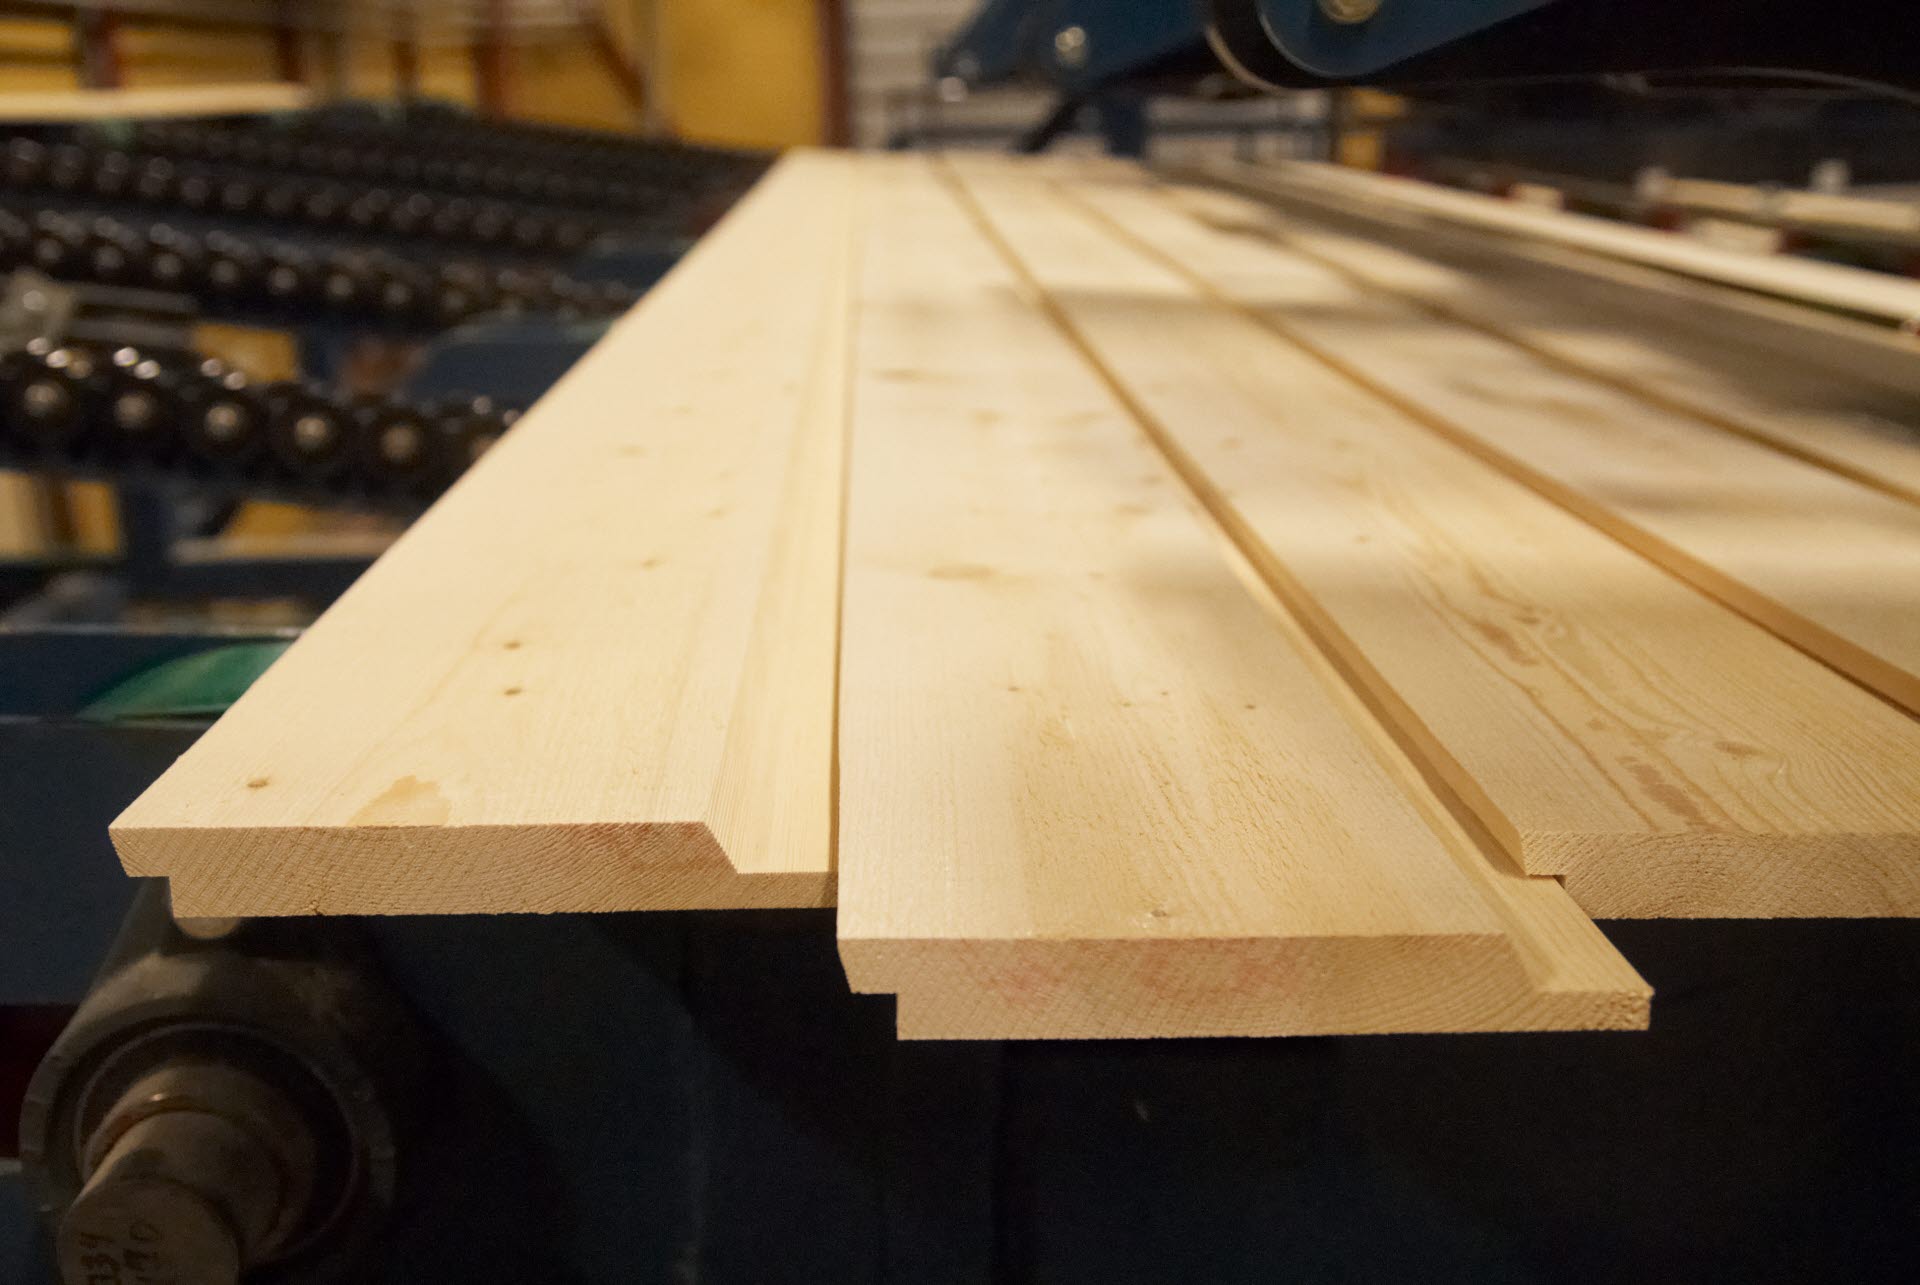 SCA increases capacity of climate-smart wood products in Stugun